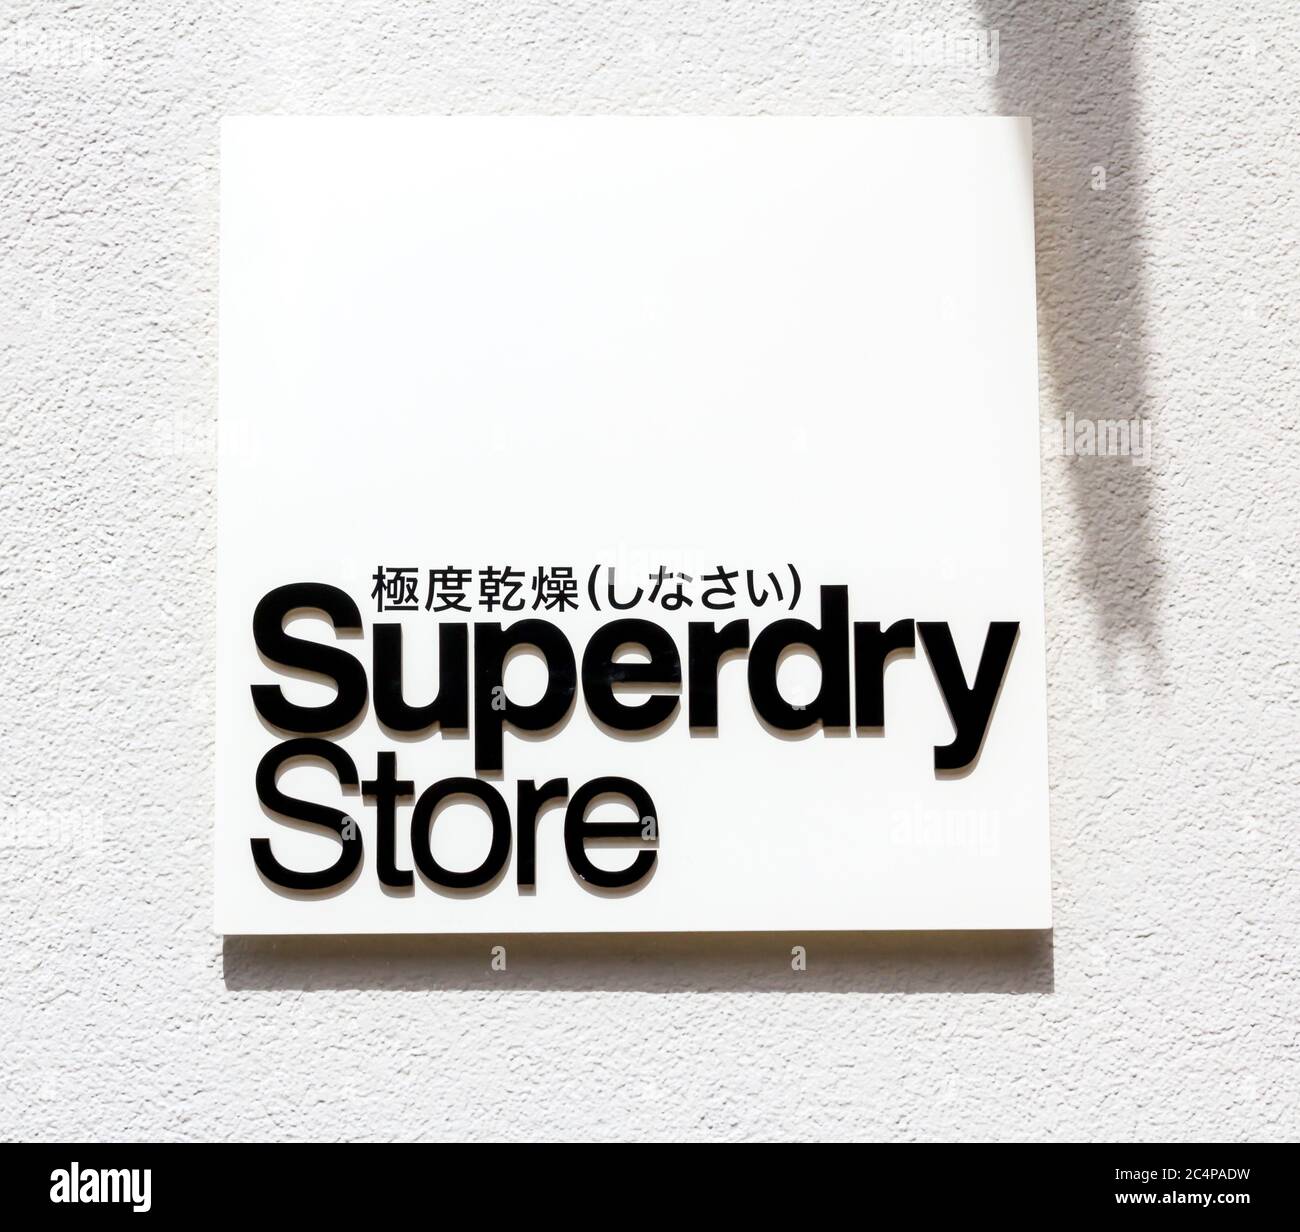 Ingolstadt, Germany : Superdry sign products combine vintage Americana  styling with Japanese inspired graphics Stock Photo - Alamy